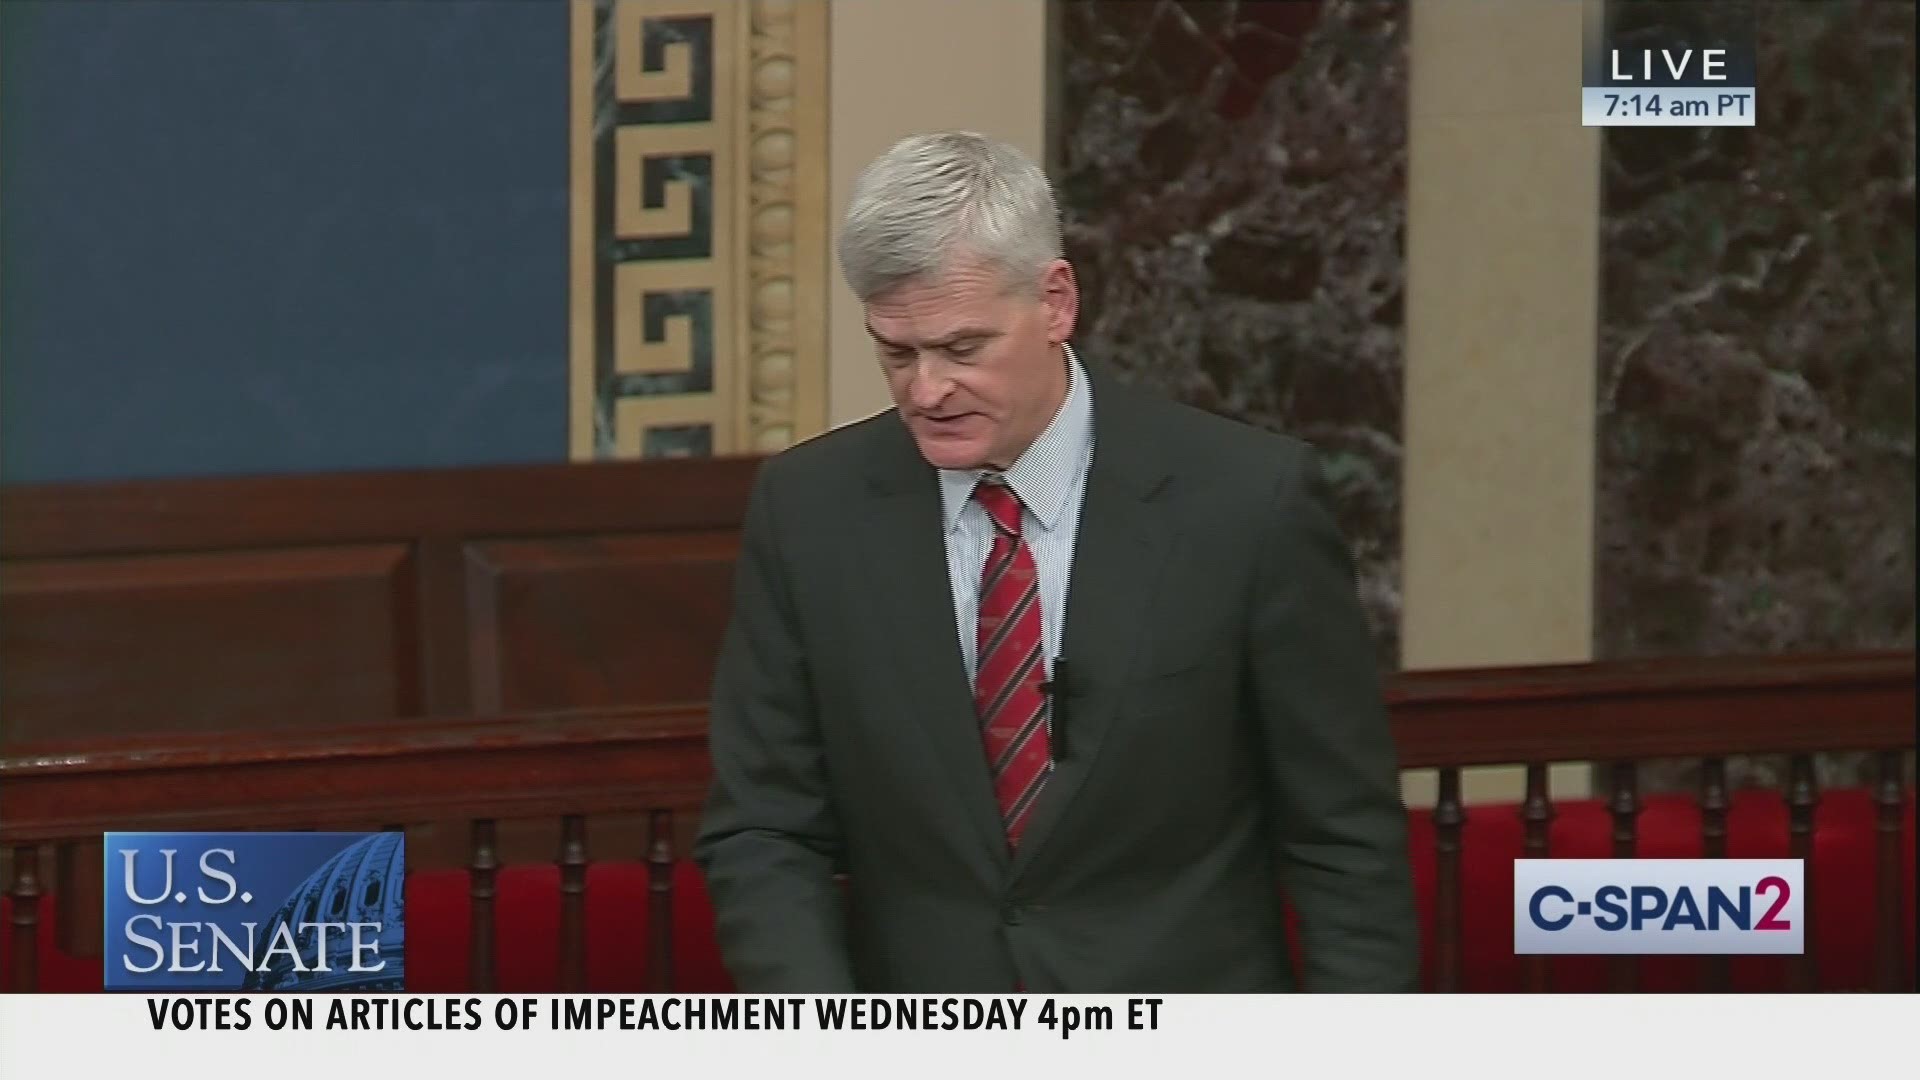 Senator Bill Cassidy announced his intention to vote against both articles of impeachment, acquitting President Trump.